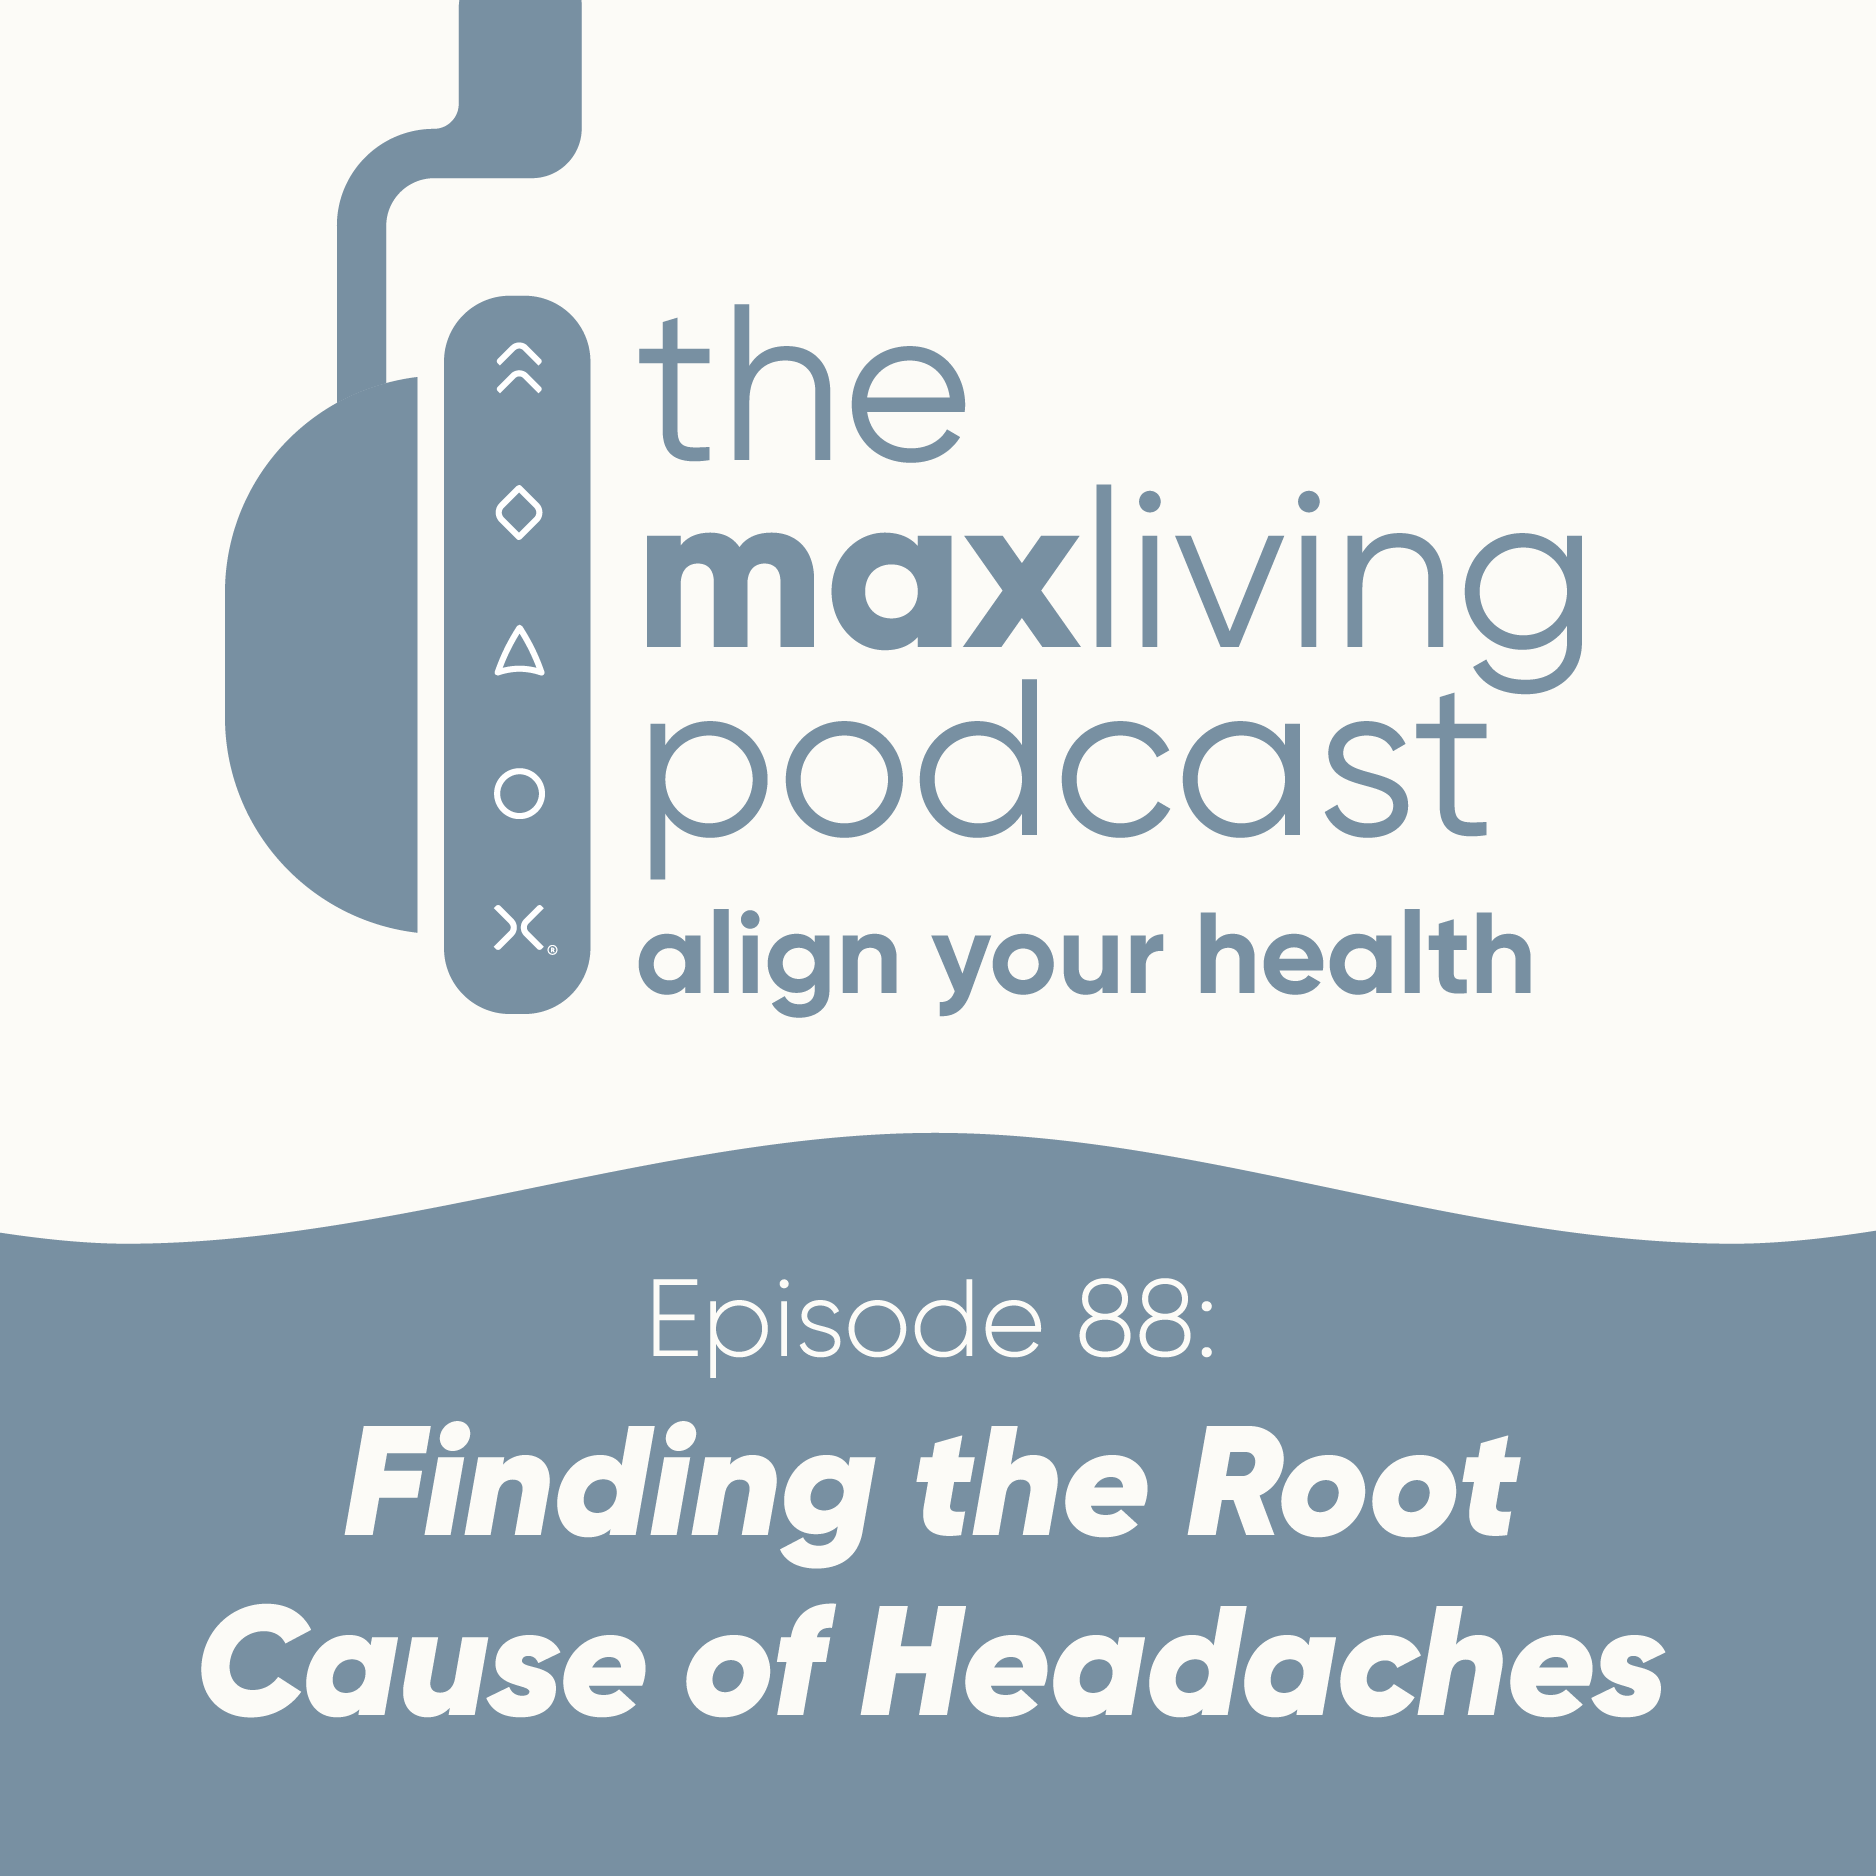 Finding the Root Cause of Headaches